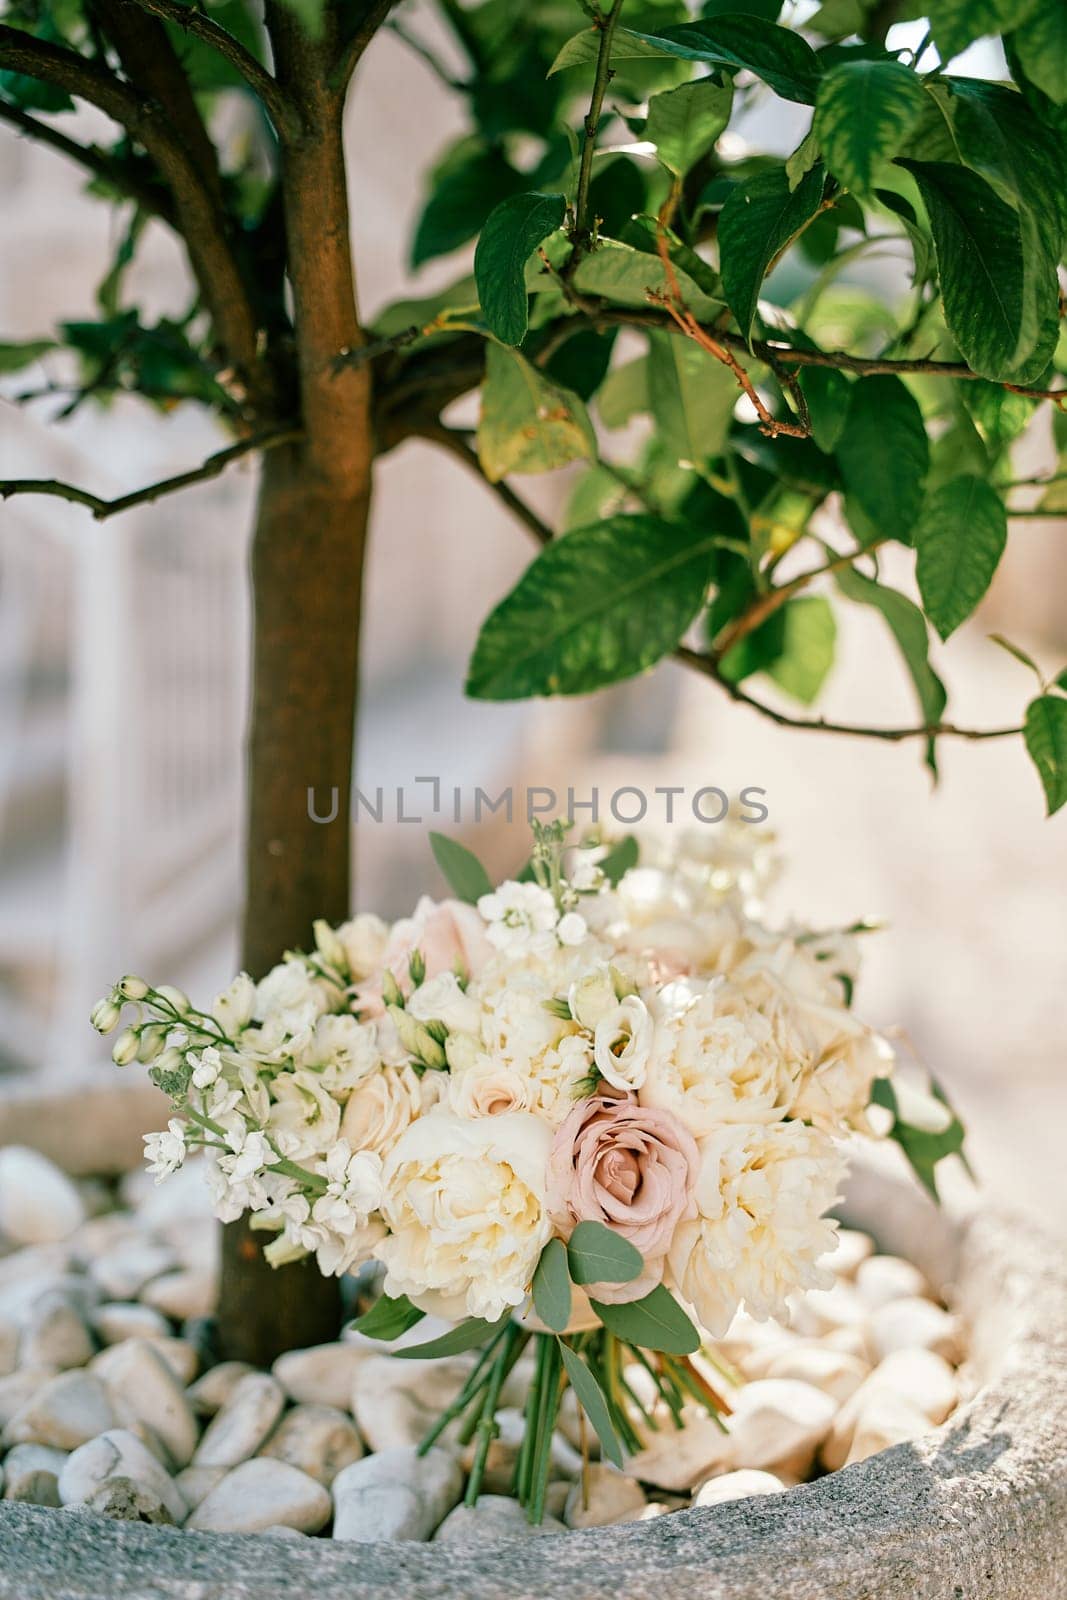 Bride bouquet stands on pebbles under a green tree in a flowerpot by Nadtochiy